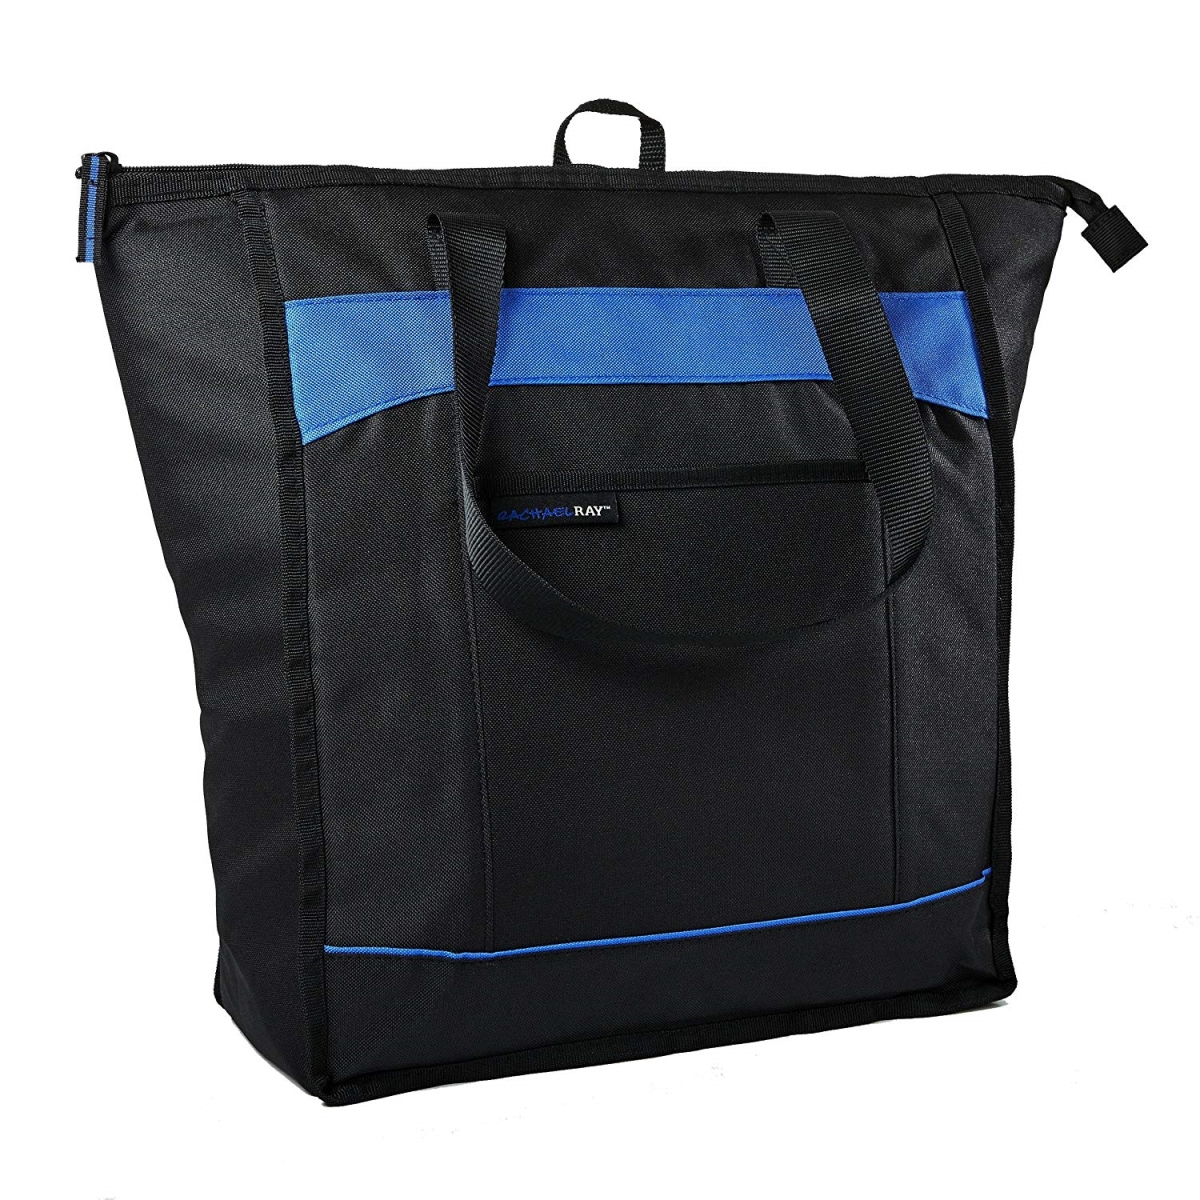 5060rr1613 Chillout Thermal Tote Insulated Bag - Black With Blue Trim